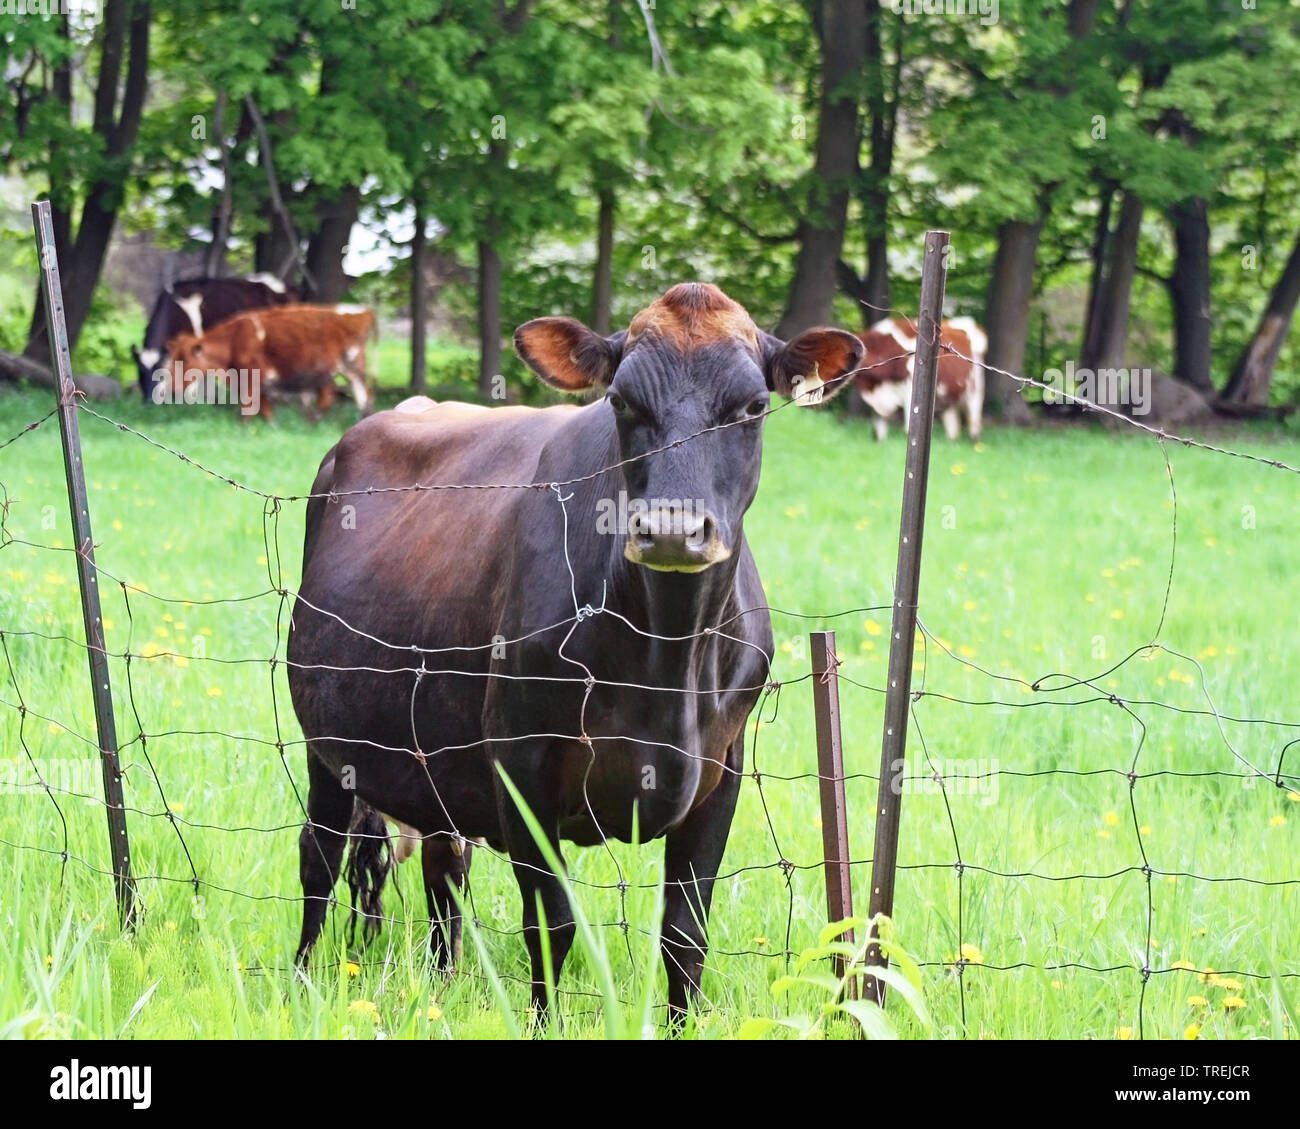 One black and brown cow looking over metal barbed wire fencing.  Herd grazing in background Stock Photo